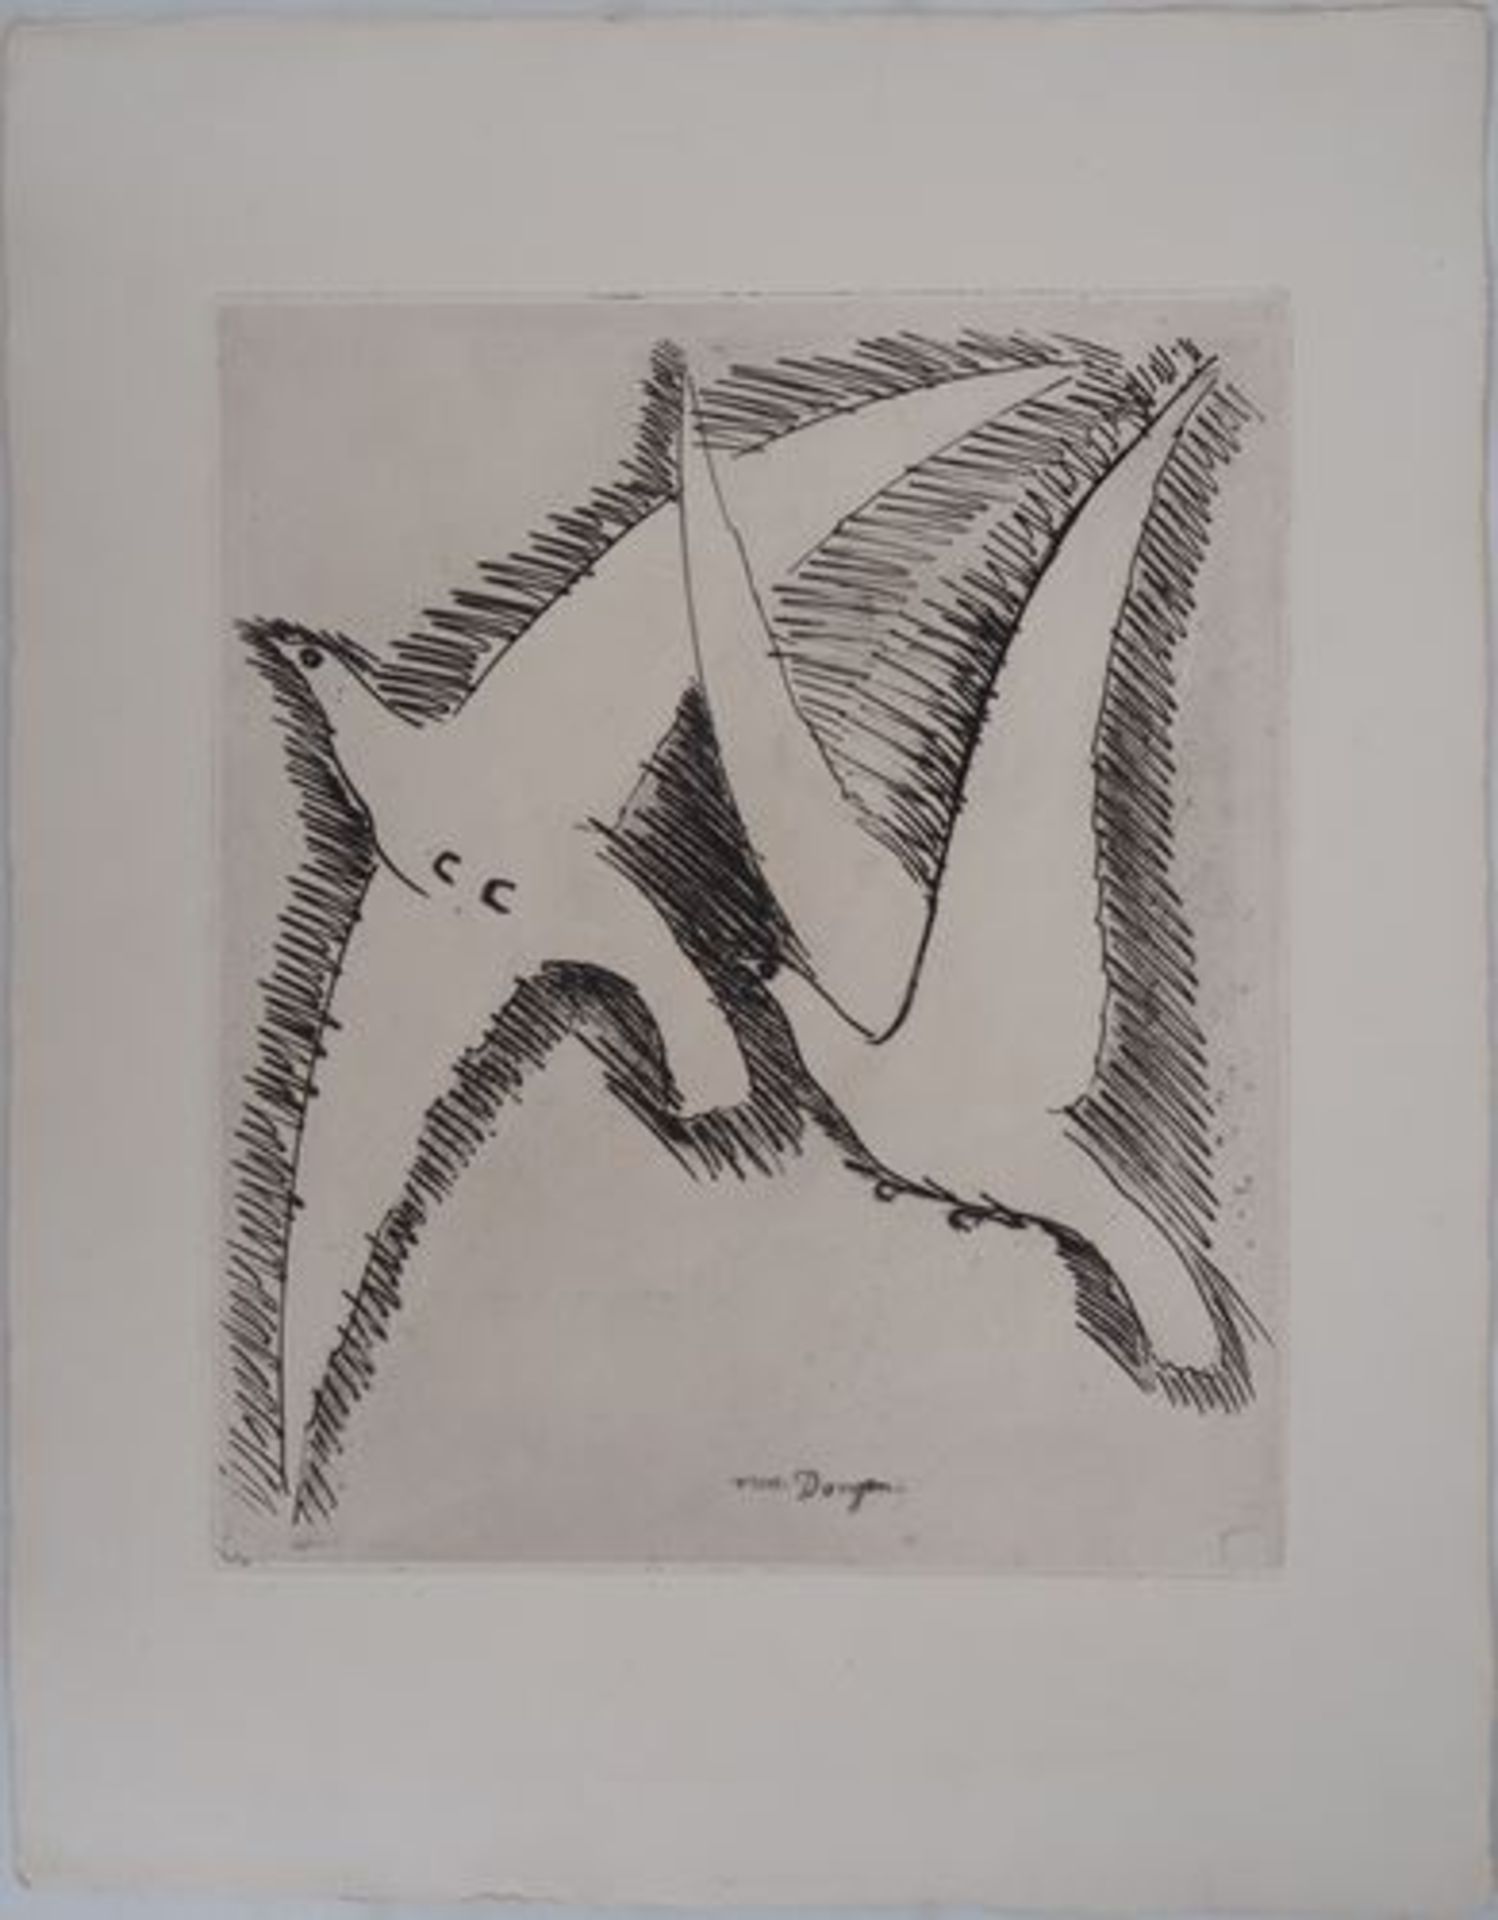 Kees VAN DONGEN The seagulls, 1930 Original etching Signed in the plate On vellum [...]